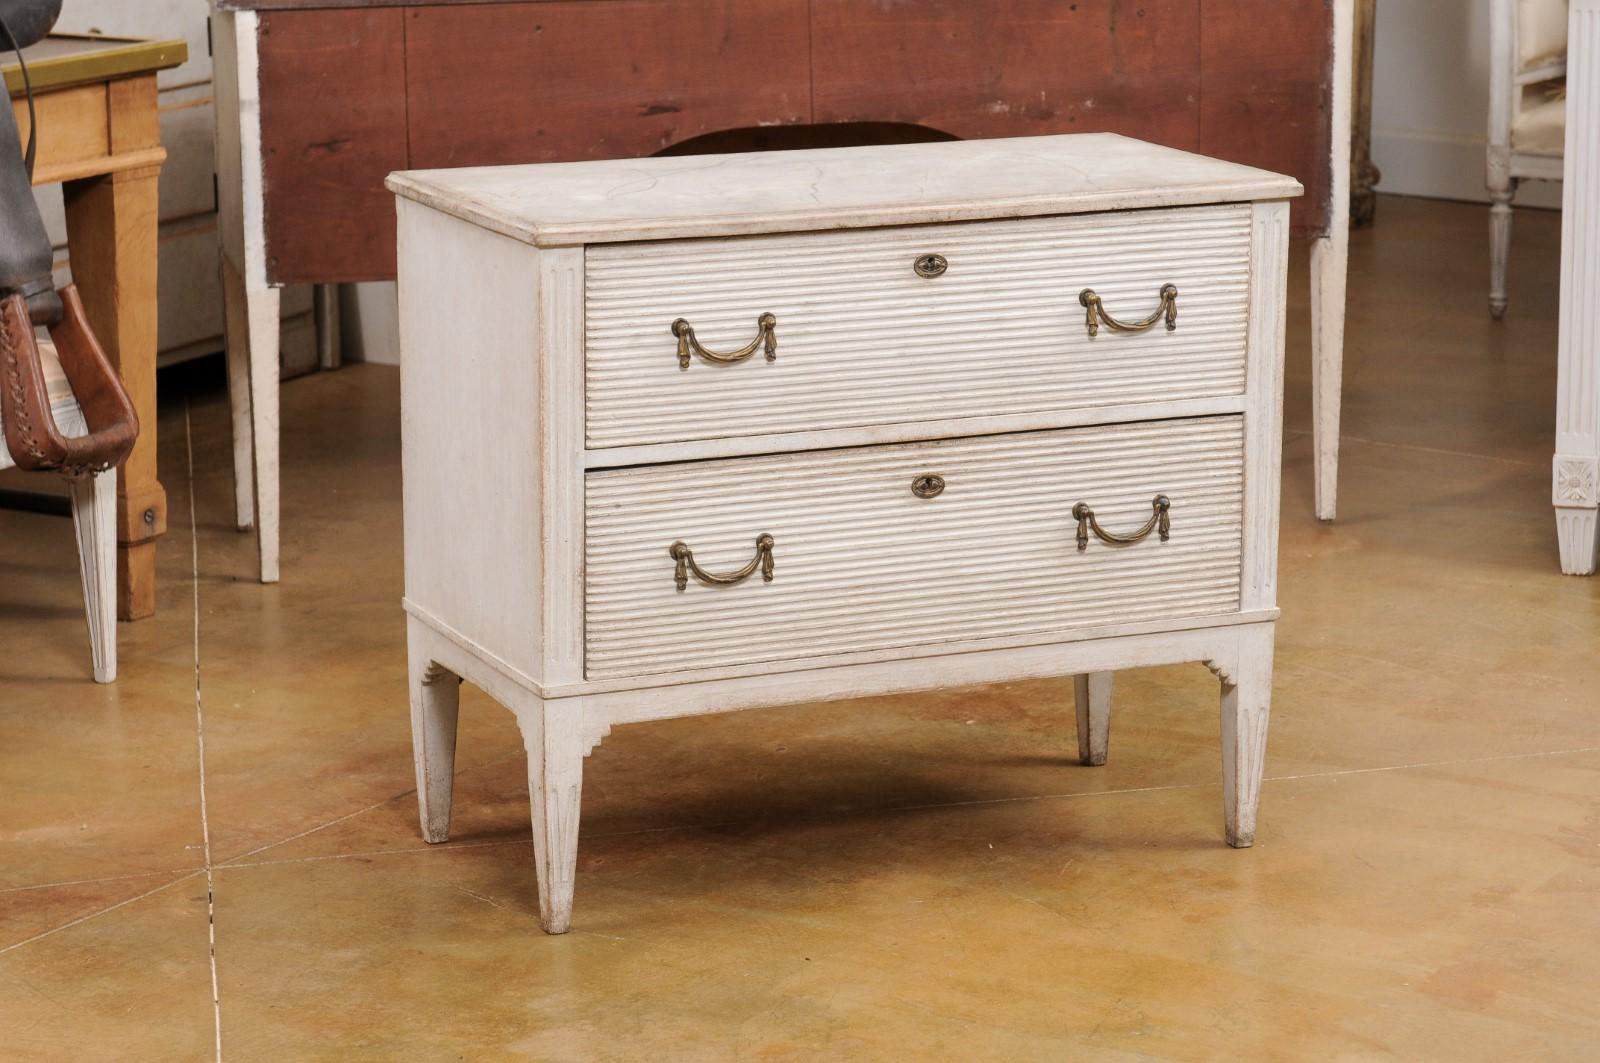 A Swedish Gustavian style painted wood chest from the 19th century with two drawers, carved reeded accents, swag hardware, marbleized top and tapered legs. Created in Sweden during the 19th century, this painted wood chest showcases the stylistic